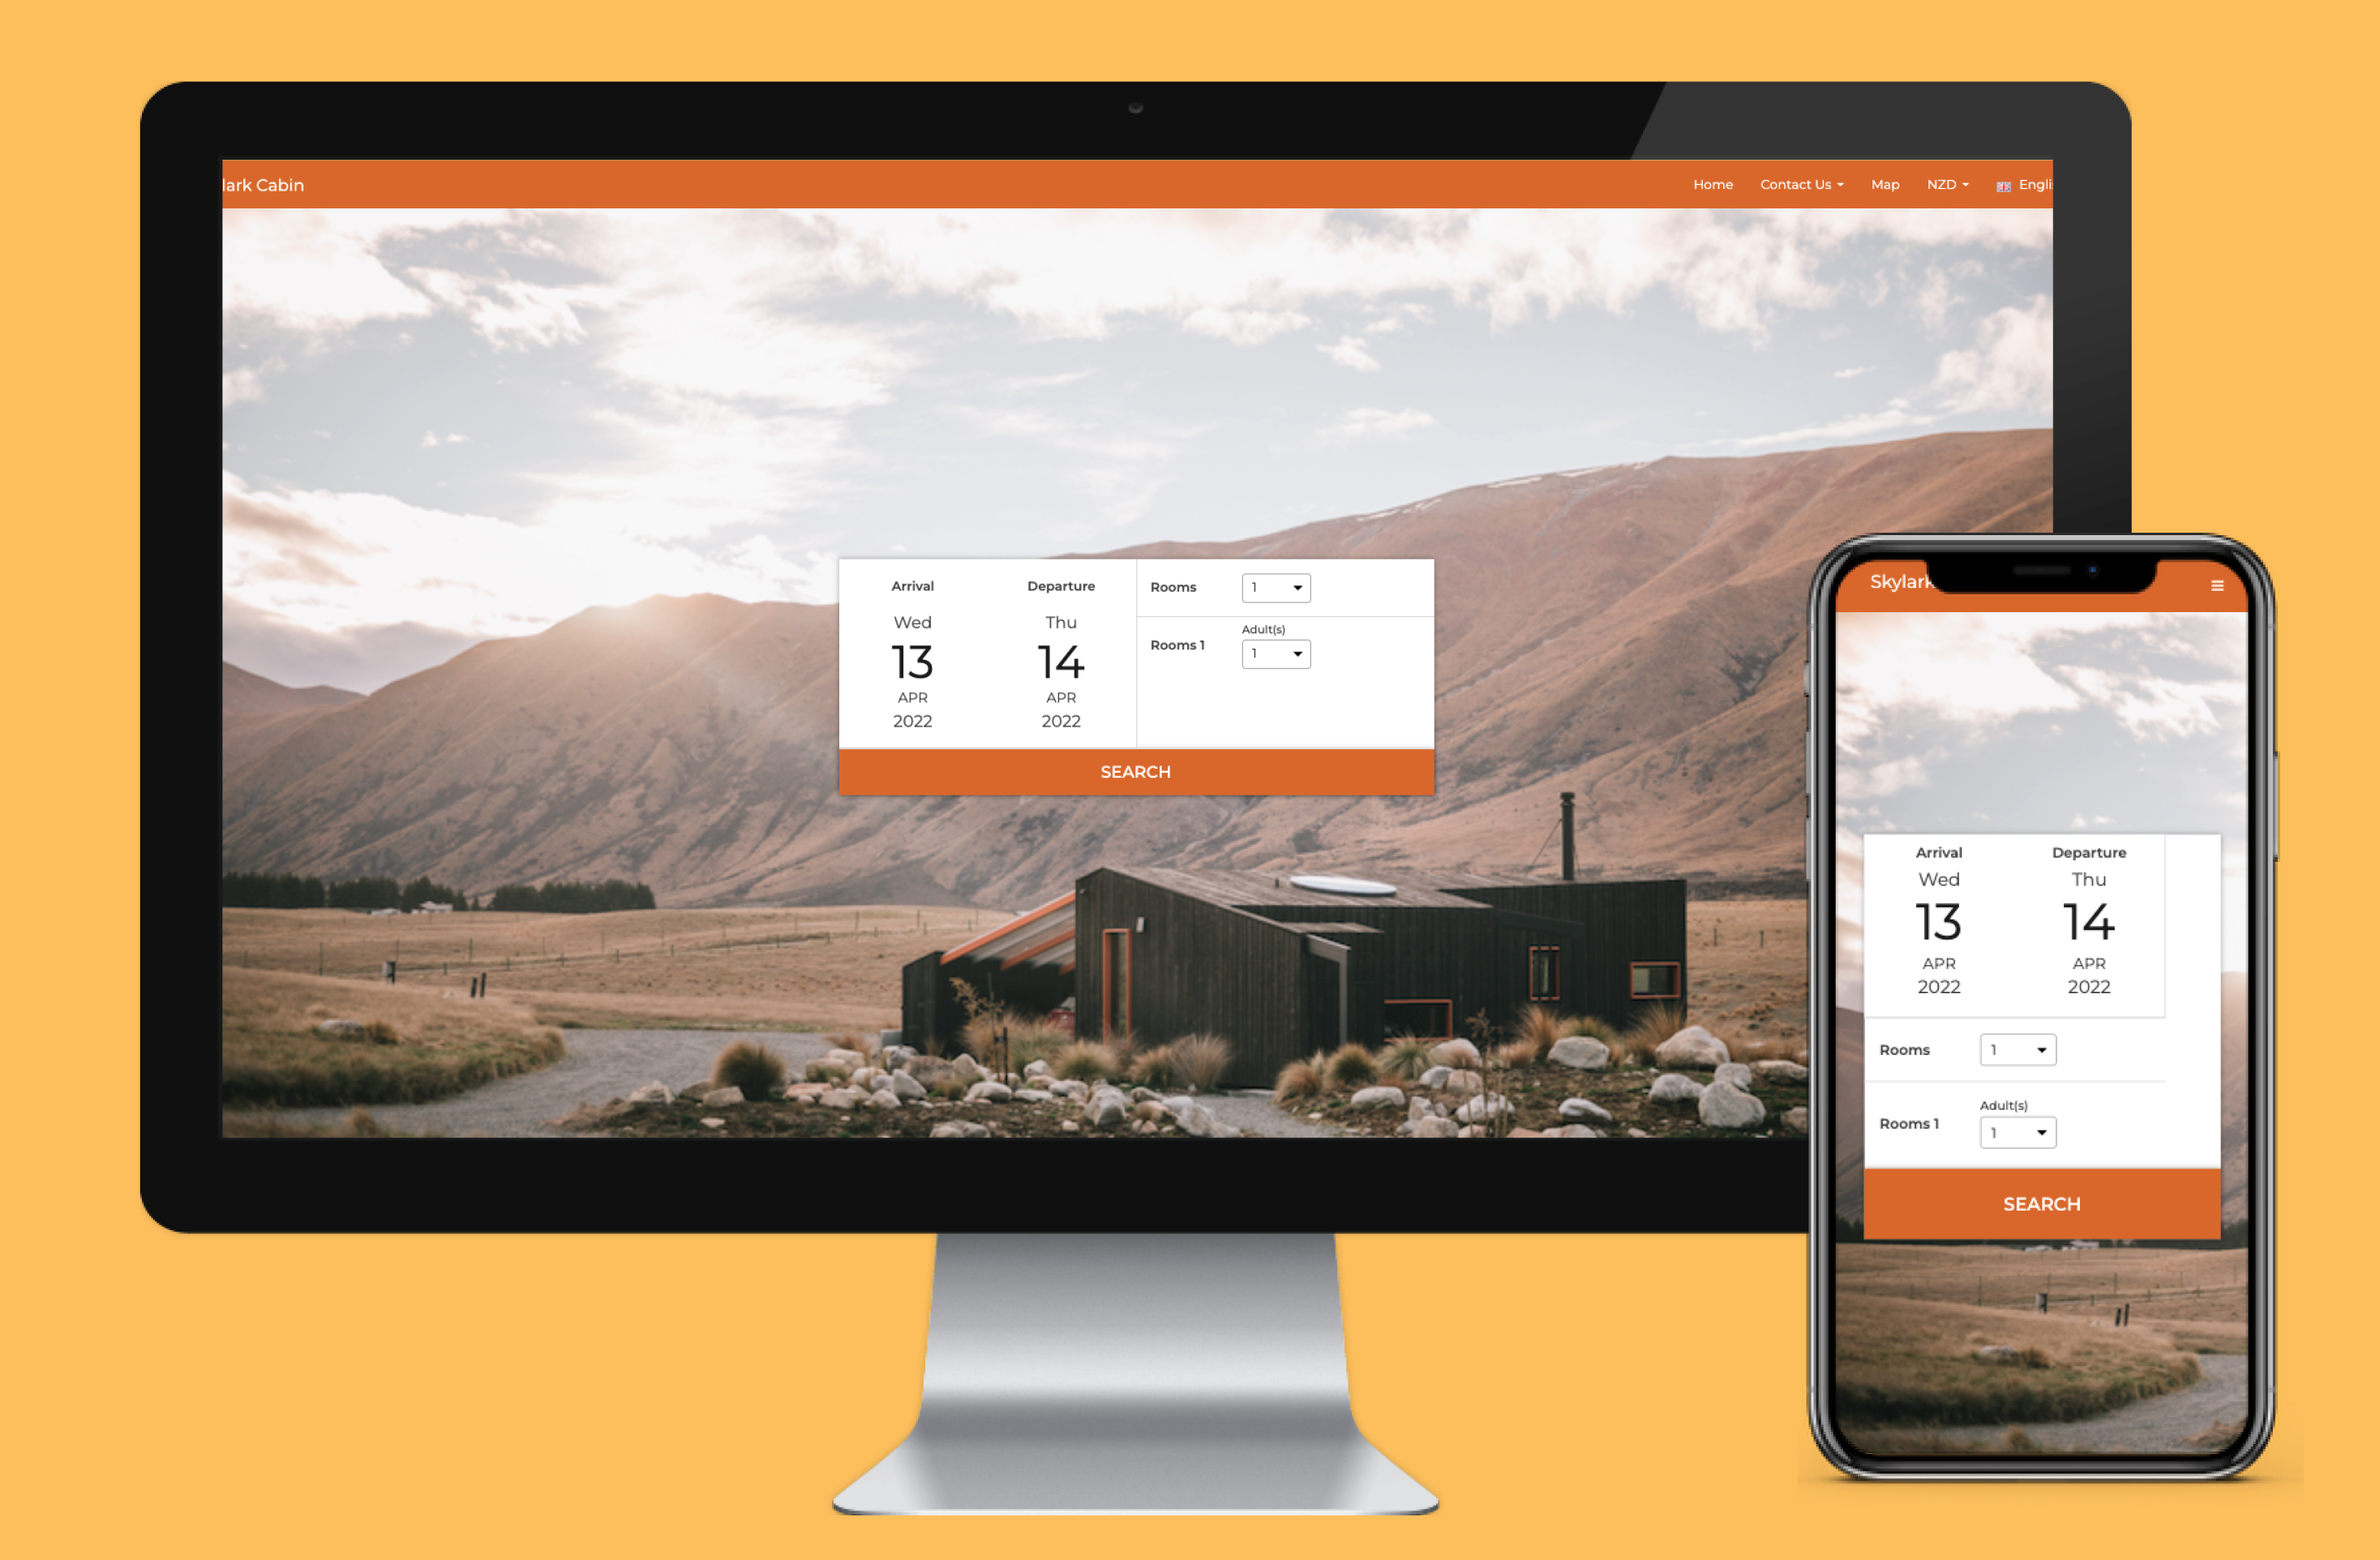 Preno's Booking Engine Software | Our BE is mobile optimised, enabling you to collect more direct bookings. Avoid the fees associated with OTAs and collect important guest details and payments all through your booking engine.